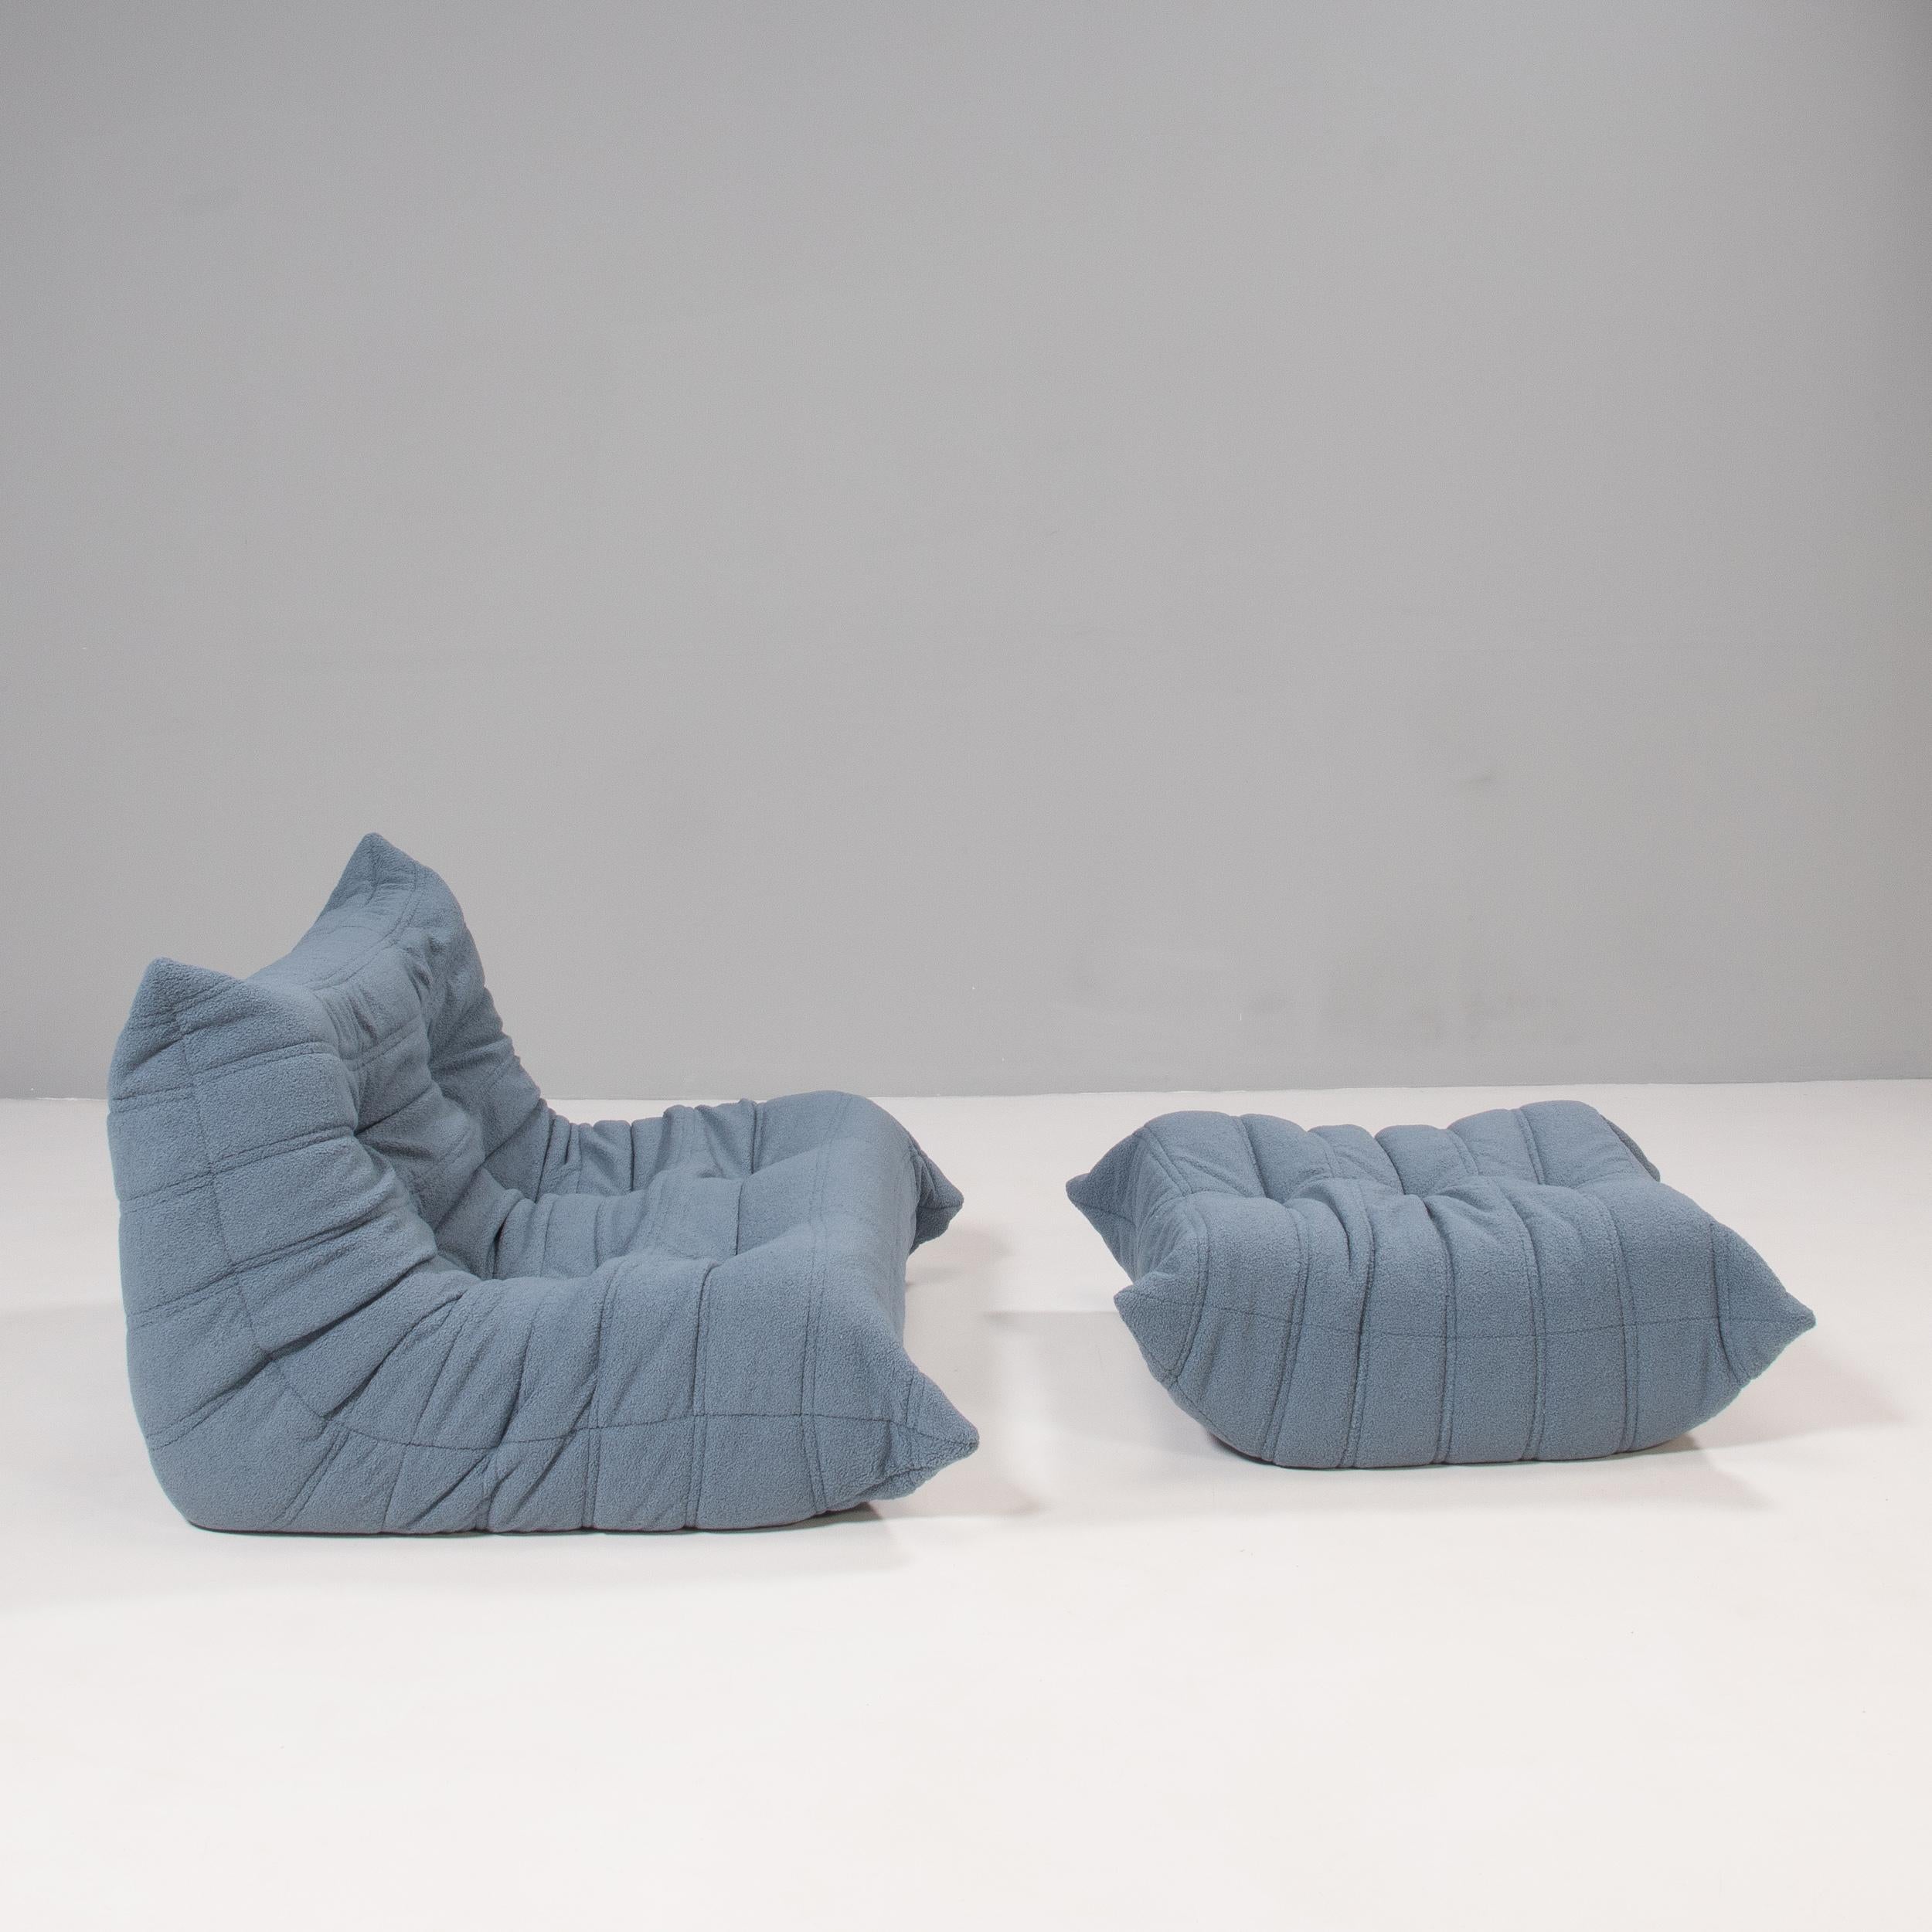 The iconic Togo sofa, originally designed by Michel Ducaroy for Ligne Roset in 1973, has become a design classic. 

These 2-seat model and footstool have been newly reupholstered in extra soft blue bouclé fabric and features the instantly